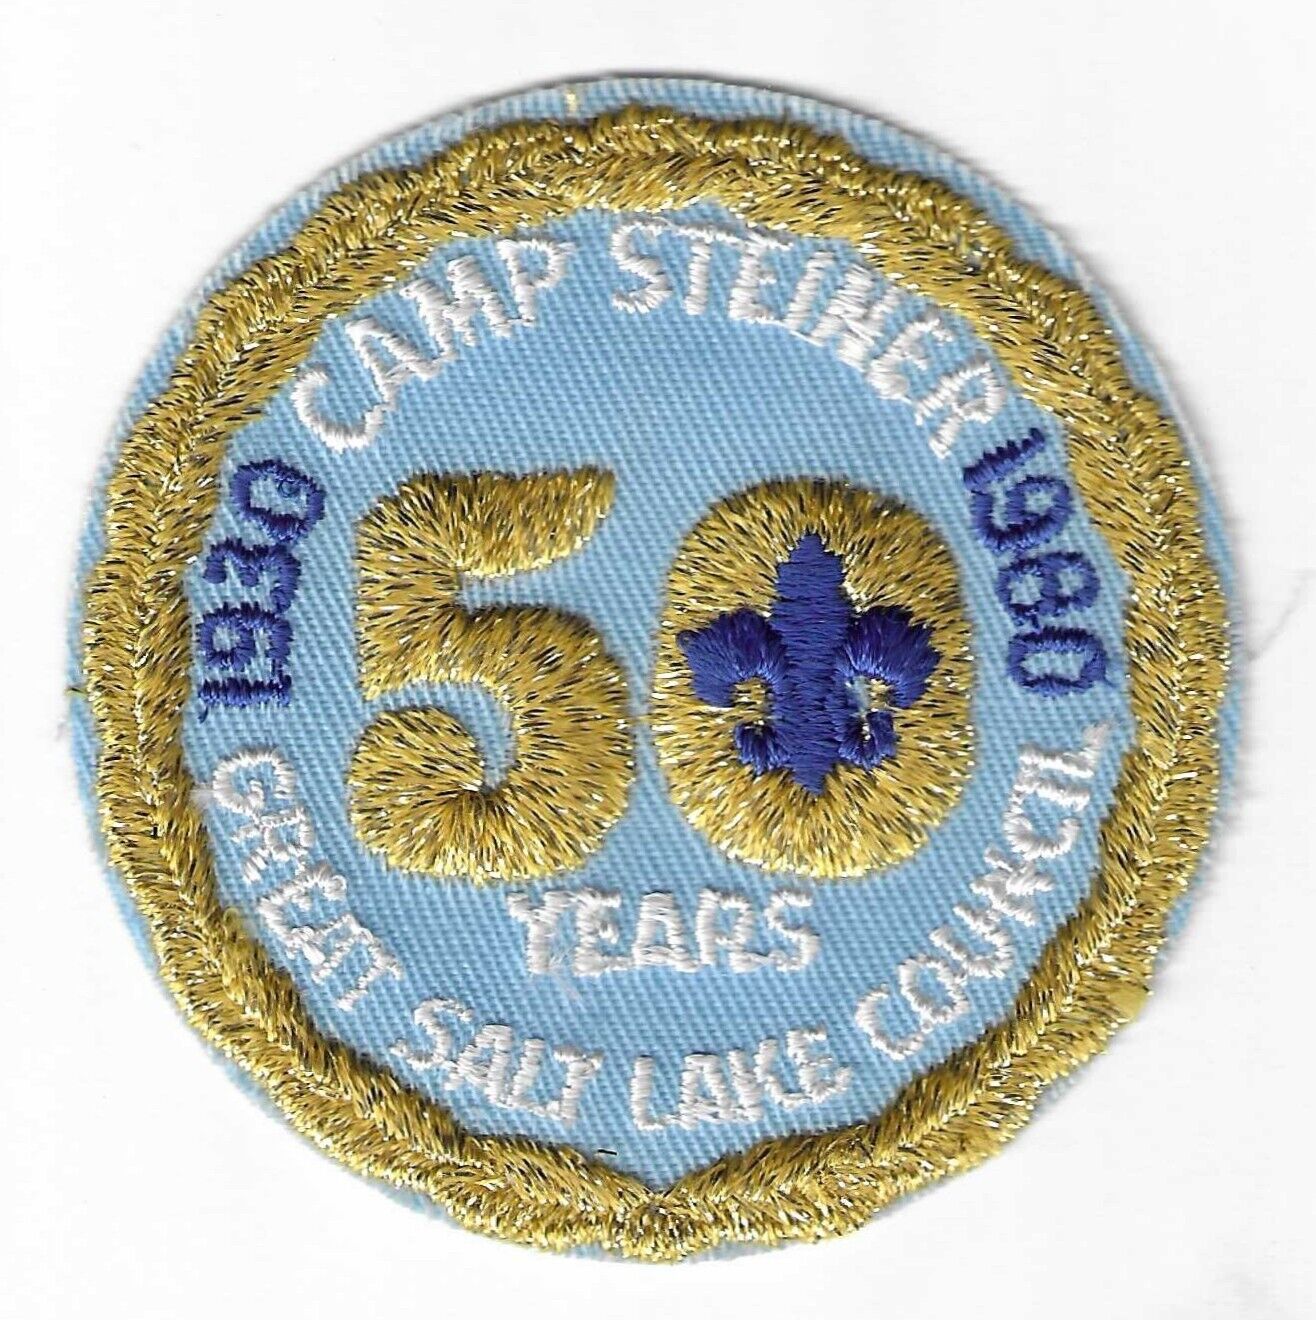 BSA GREAT SALT LAKE COUNCIL CAMP STEINER 1980 50 YEARS MINT PATCH